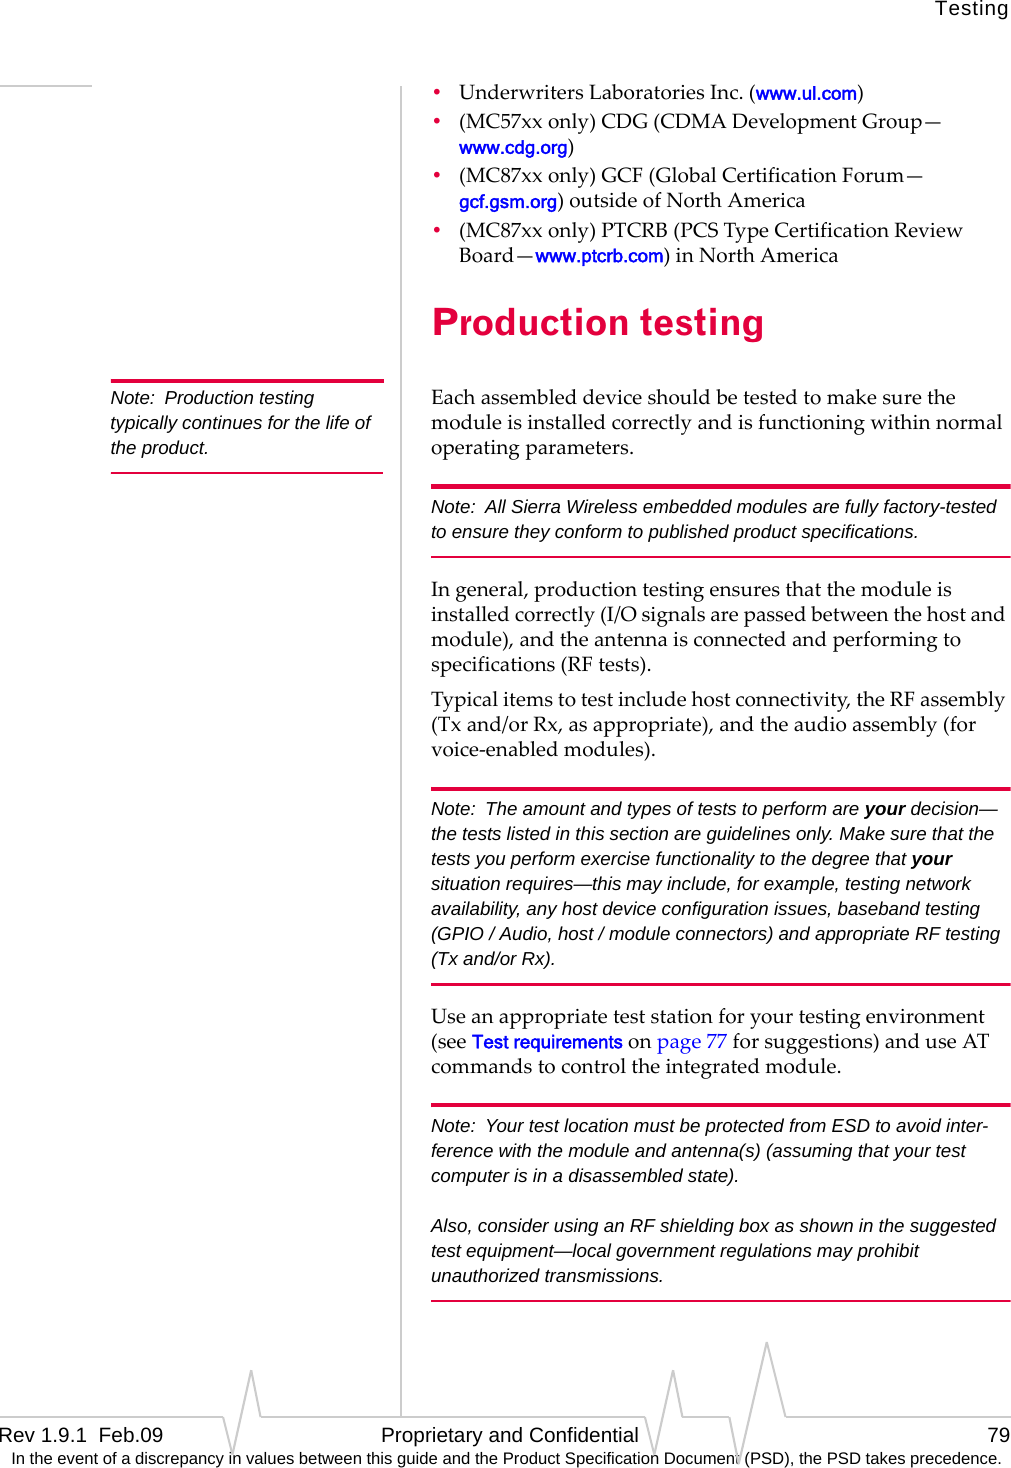 TestingRev 1.9.1  Feb.09   Proprietary and Confidential 79 In the event of a discrepancy in values between this guide and the Product Specification Document (PSD), the PSD takes precedence.•UnderwritersLaboratoriesInc.(www.ul.com)•(MC57xxonly)CDG(CDMADevelopmentGroup—www.cdg.org)•(MC87xxonly)GCF(GlobalCertificationForum—gcf.gsm.org)outsideofNorthAmerica•(MC87xxonly)PTCRB(PCSTypeCertificationReviewBoard—www.ptcrb.com)inNorthAmericaProduction testingNote: Production testing typically continues for the life of the product.Eachassembleddeviceshouldbetestedtomakesurethemoduleisinstalledcorrectlyandisfunctioningwithinnormaloperatingparameters.Note: All Sierra Wireless embedded modules are fully factory-tested to ensure they conform to published product specifications.Ingeneral,productiontestingensuresthatthemoduleisinstalledcorrectly(I/Osignalsarepassedbetweenthehostandmodule),andtheantennaisconnectedandperformingtospecifications(RFtests).Typicalitemstotestincludehostconnectivity,theRFassembly(Txand/orRx,asappropriate),andtheaudioassembly(forvoice‐enabledmodules).Note: The amount and types of tests to perform are your decision—the tests listed in this section are guidelines only. Make sure that the tests you perform exercise functionality to the degree that your situation requires—this may include, for example, testing network availability, any host device configuration issues, baseband testing (GPIO / Audio, host / module connectors) and appropriate RF testing (Tx and/or Rx).Useanappropriateteststationforyourtestingenvironment(seeTest requirementsonpage77forsuggestions)anduseATcommandstocontroltheintegratedmodule.Note: Your test location must be protected from ESD to avoid inter-ference with the module and antenna(s) (assuming that your test computer is in a disassembled state).  Also, consider using an RF shielding box as shown in the suggested test equipment—local government regulations may prohibit unauthorized transmissions.